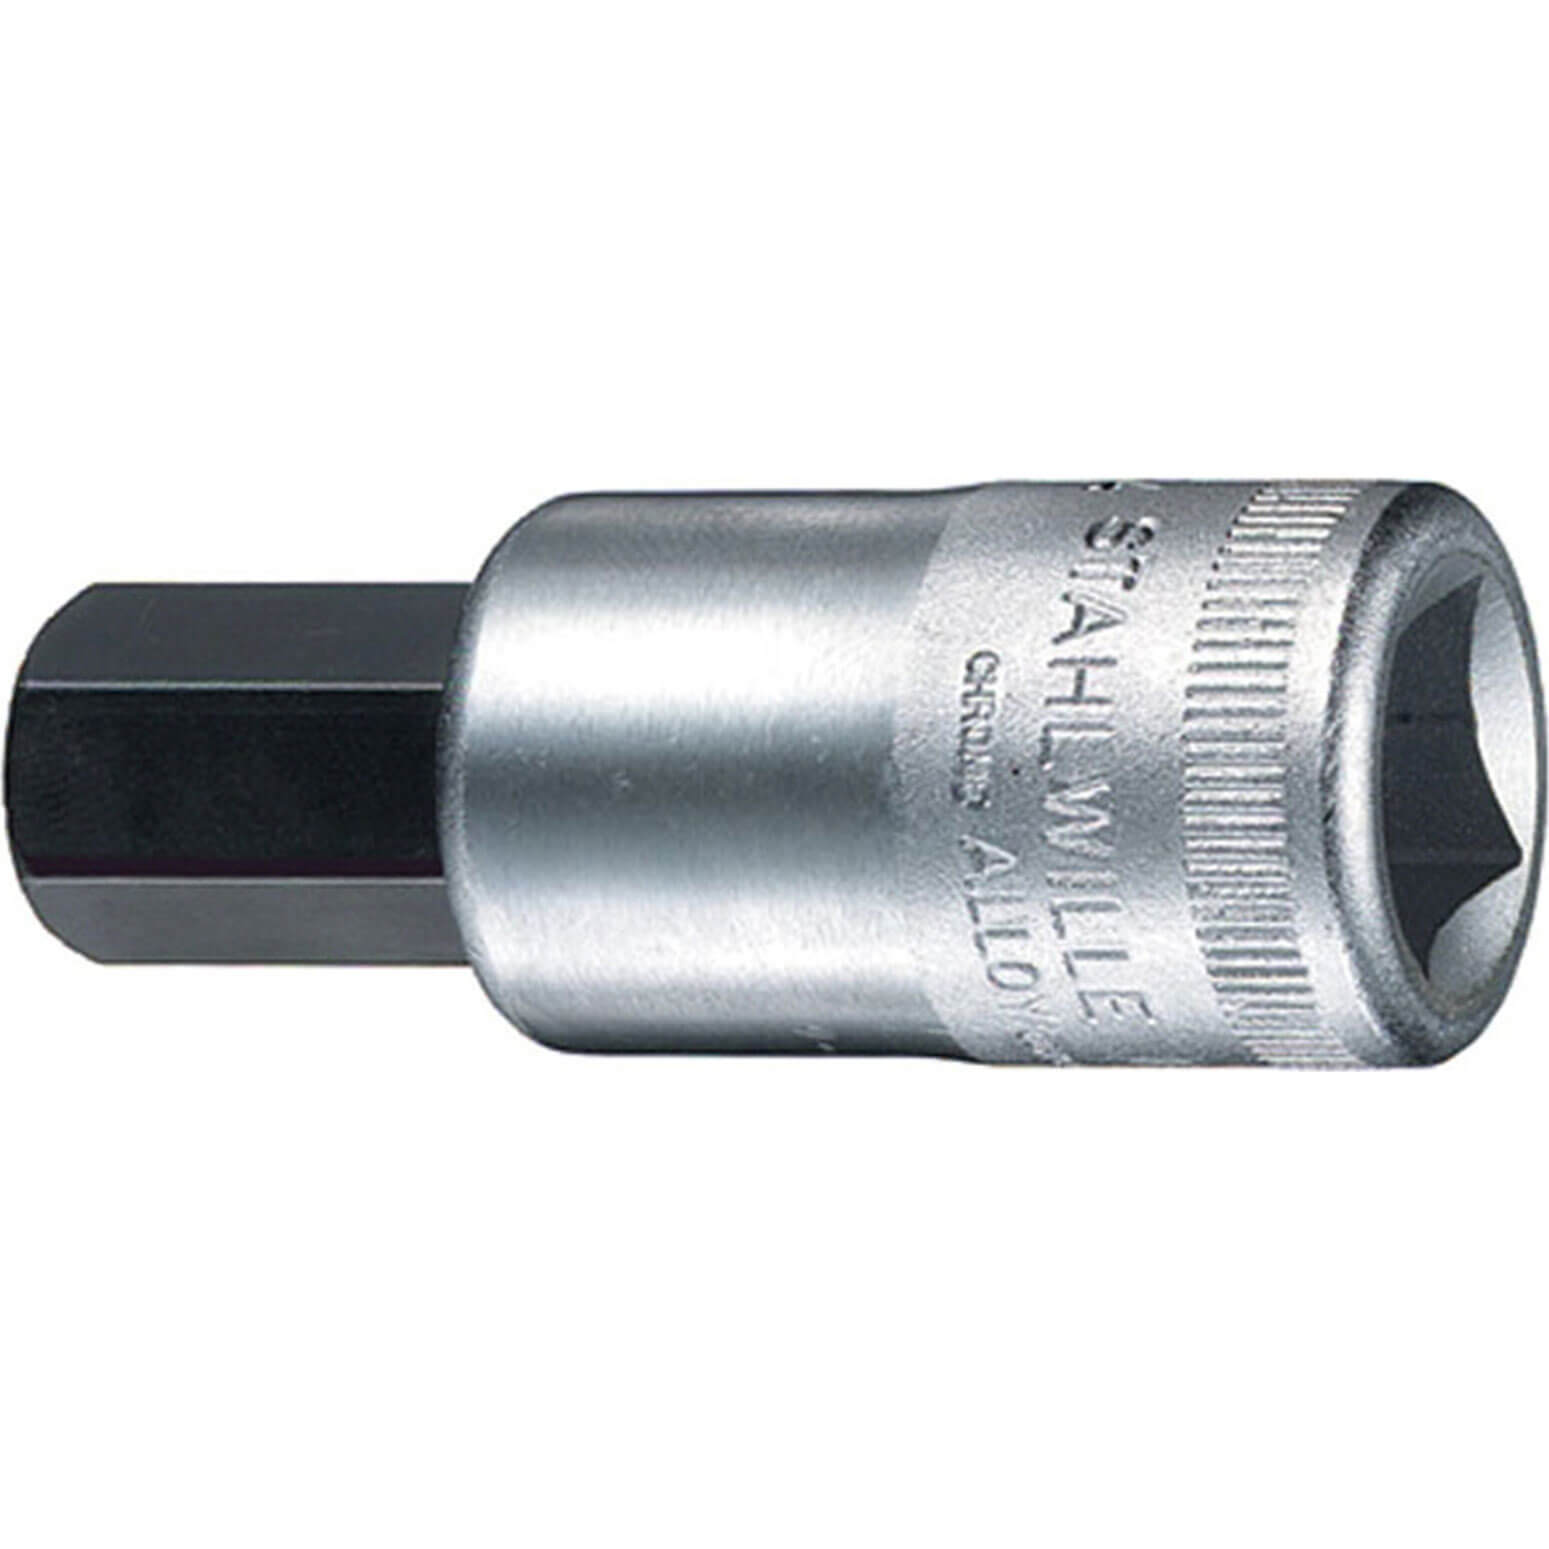 Image of Stahlwille 1/2" Drive INHEX Hexagon Socket Bit Imperial 1/2" 3/8"